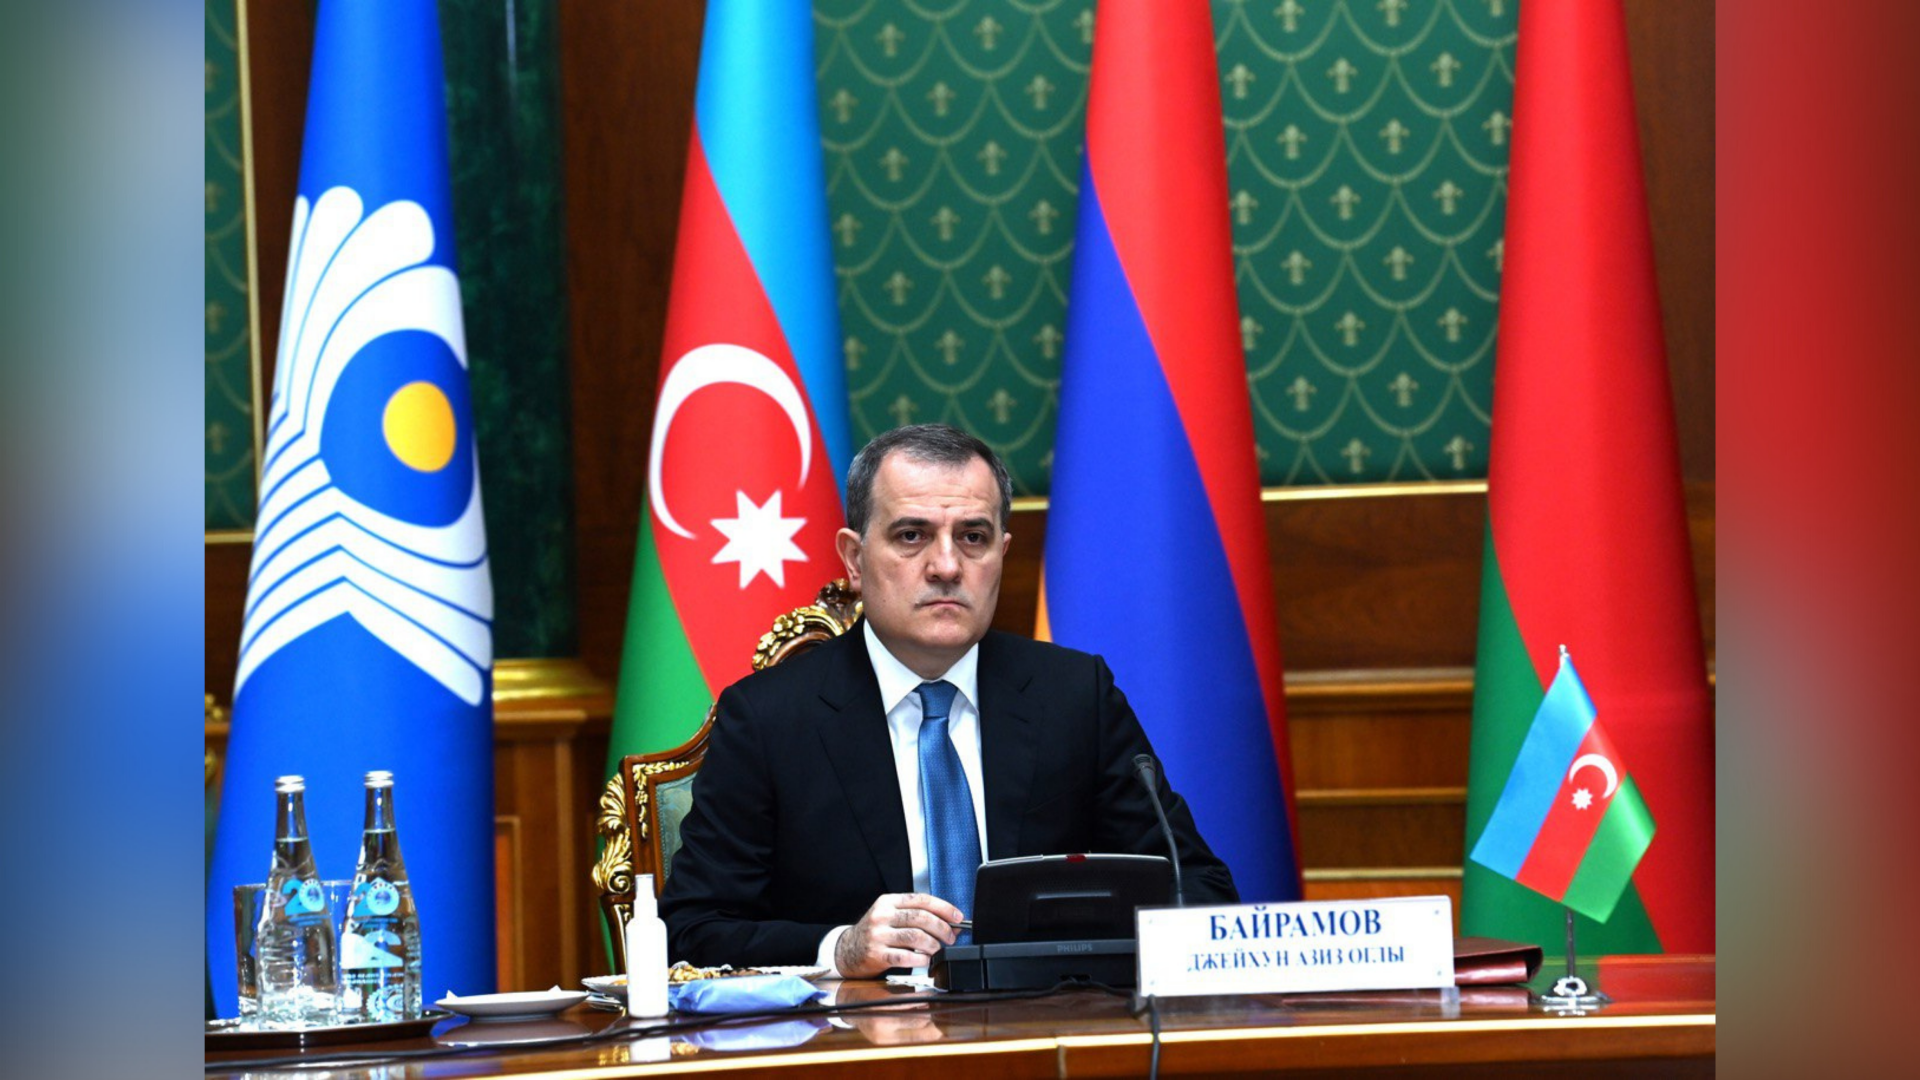 Chairmen and format of commissions for border delimitation between Azerbaijan and Armenia determined